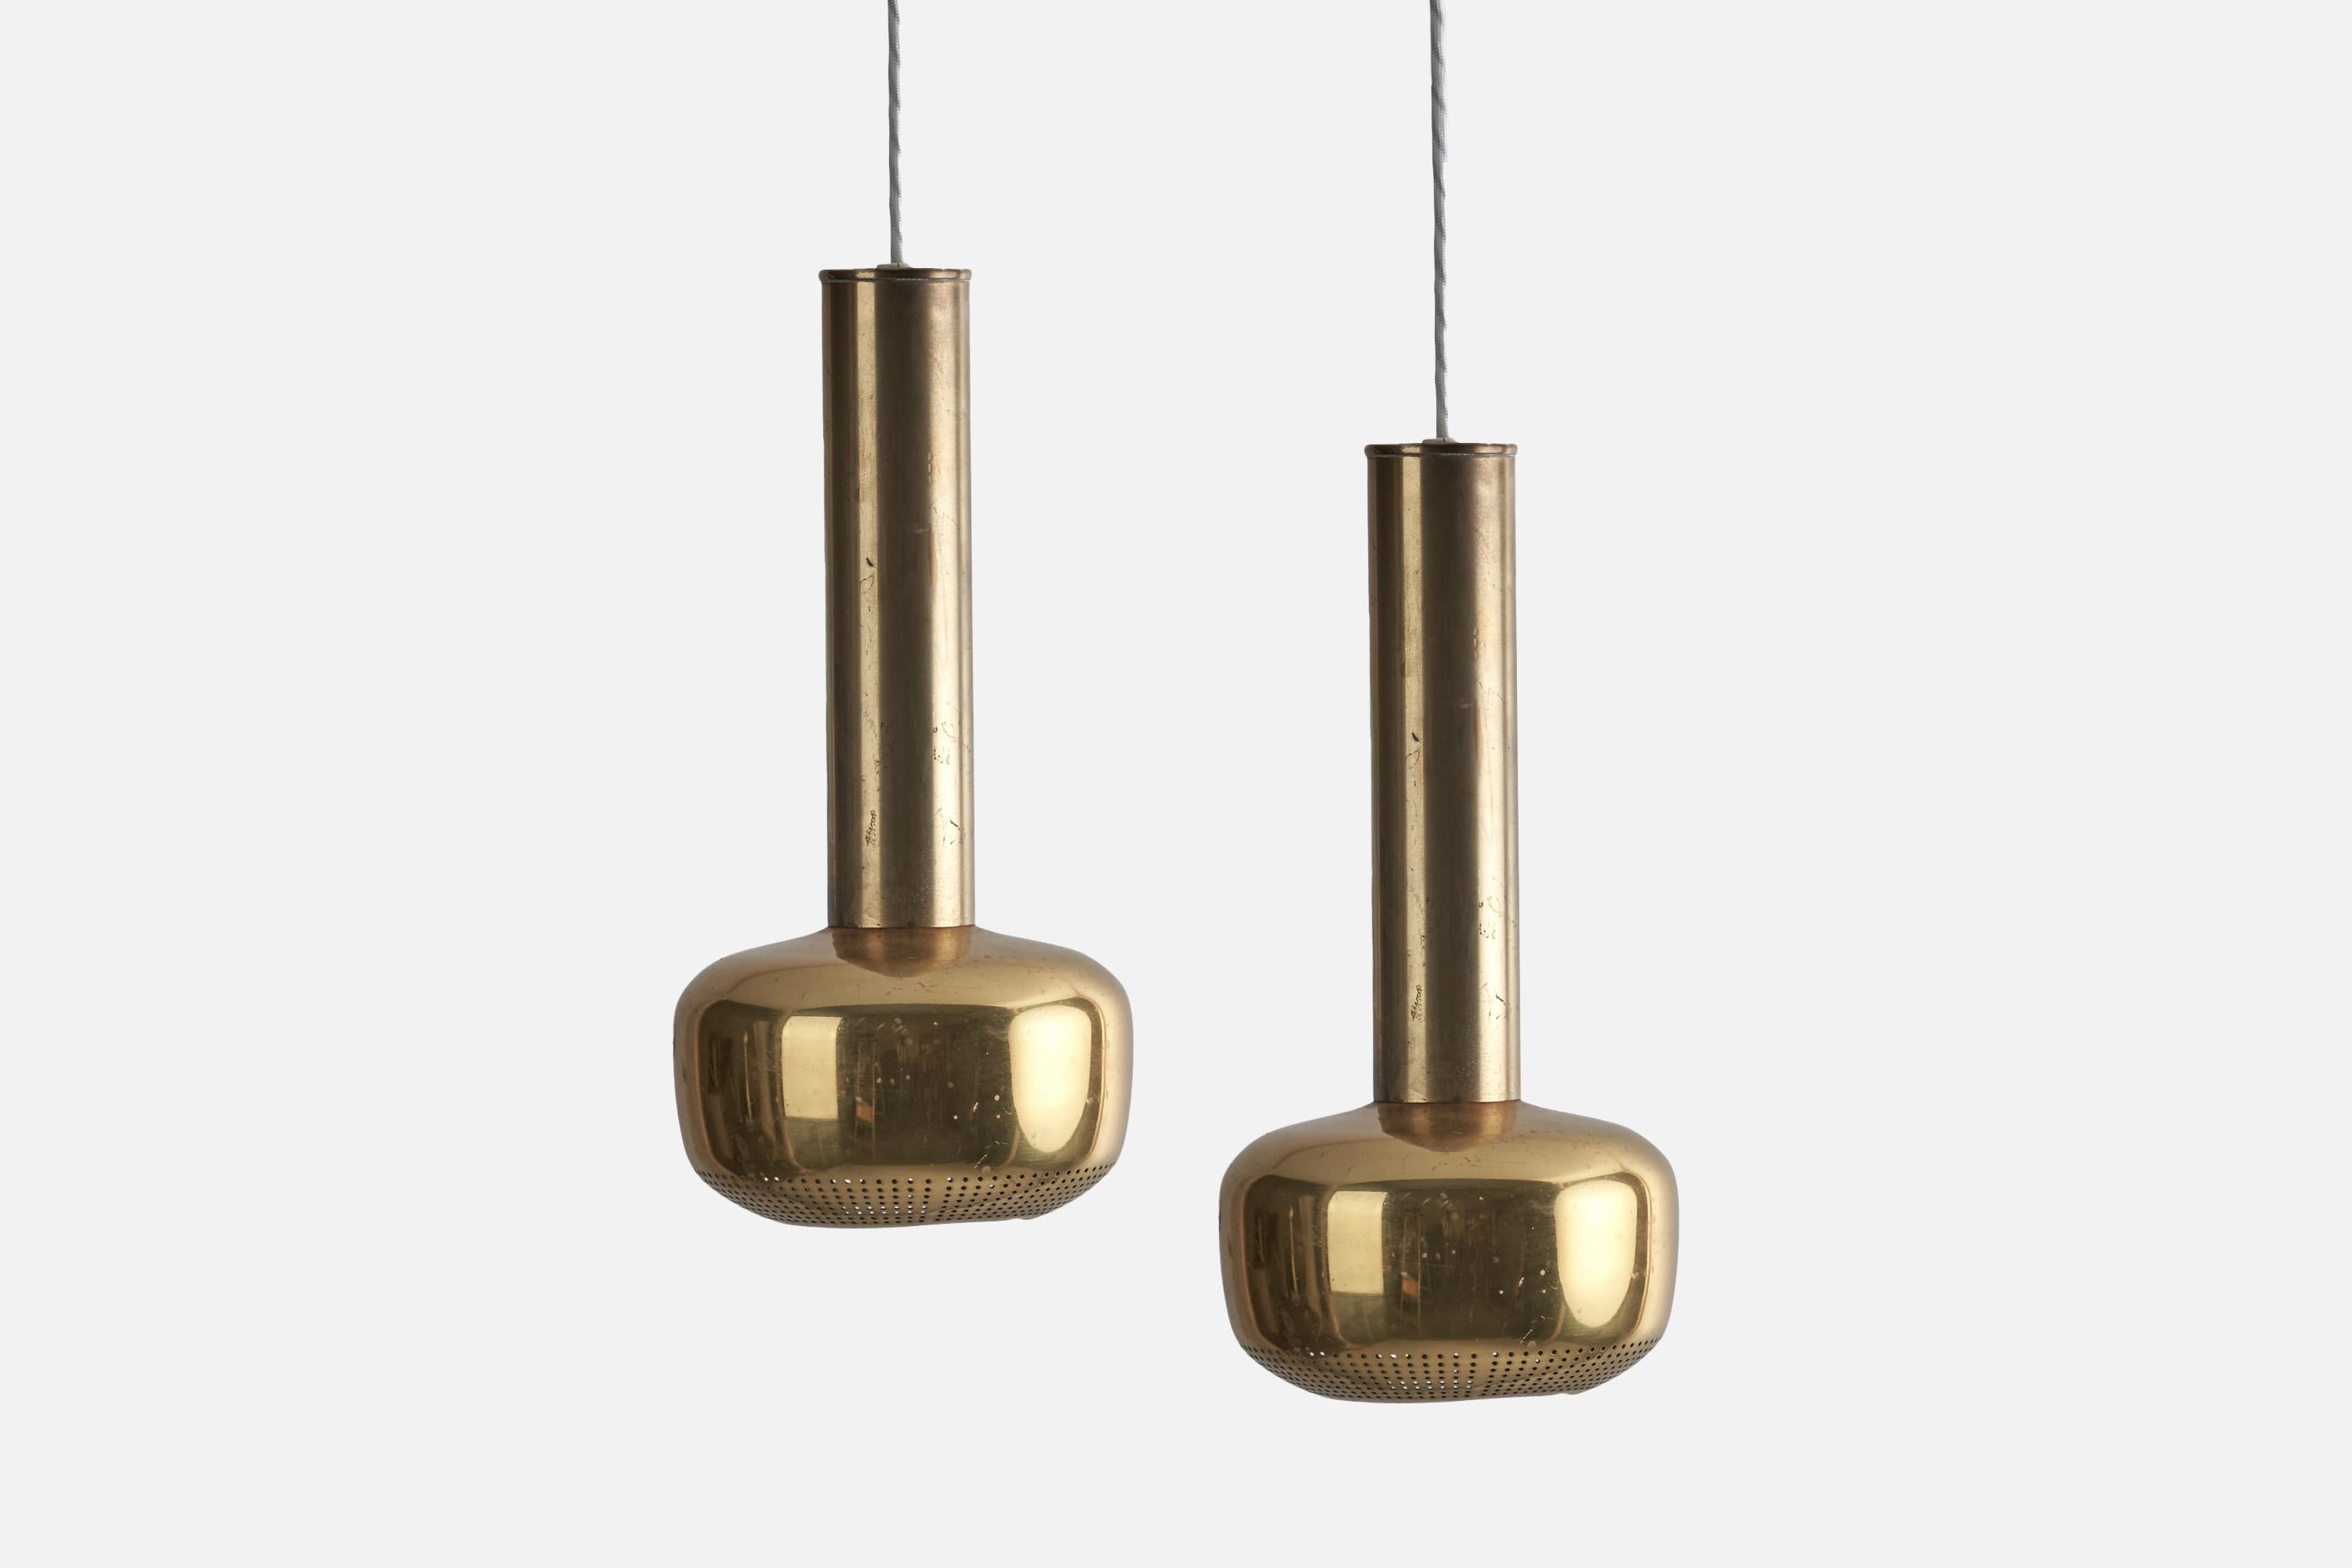 A set of 3 brass pendants designed by Vilhelm Lauritzen and produced by Louis Poulsen, Denmark, c. 1950s.

Pendants sold without canopy.

Sockets take standard E-26 medium base bulbs.

There is no maximum wattage stated on the fixtures.